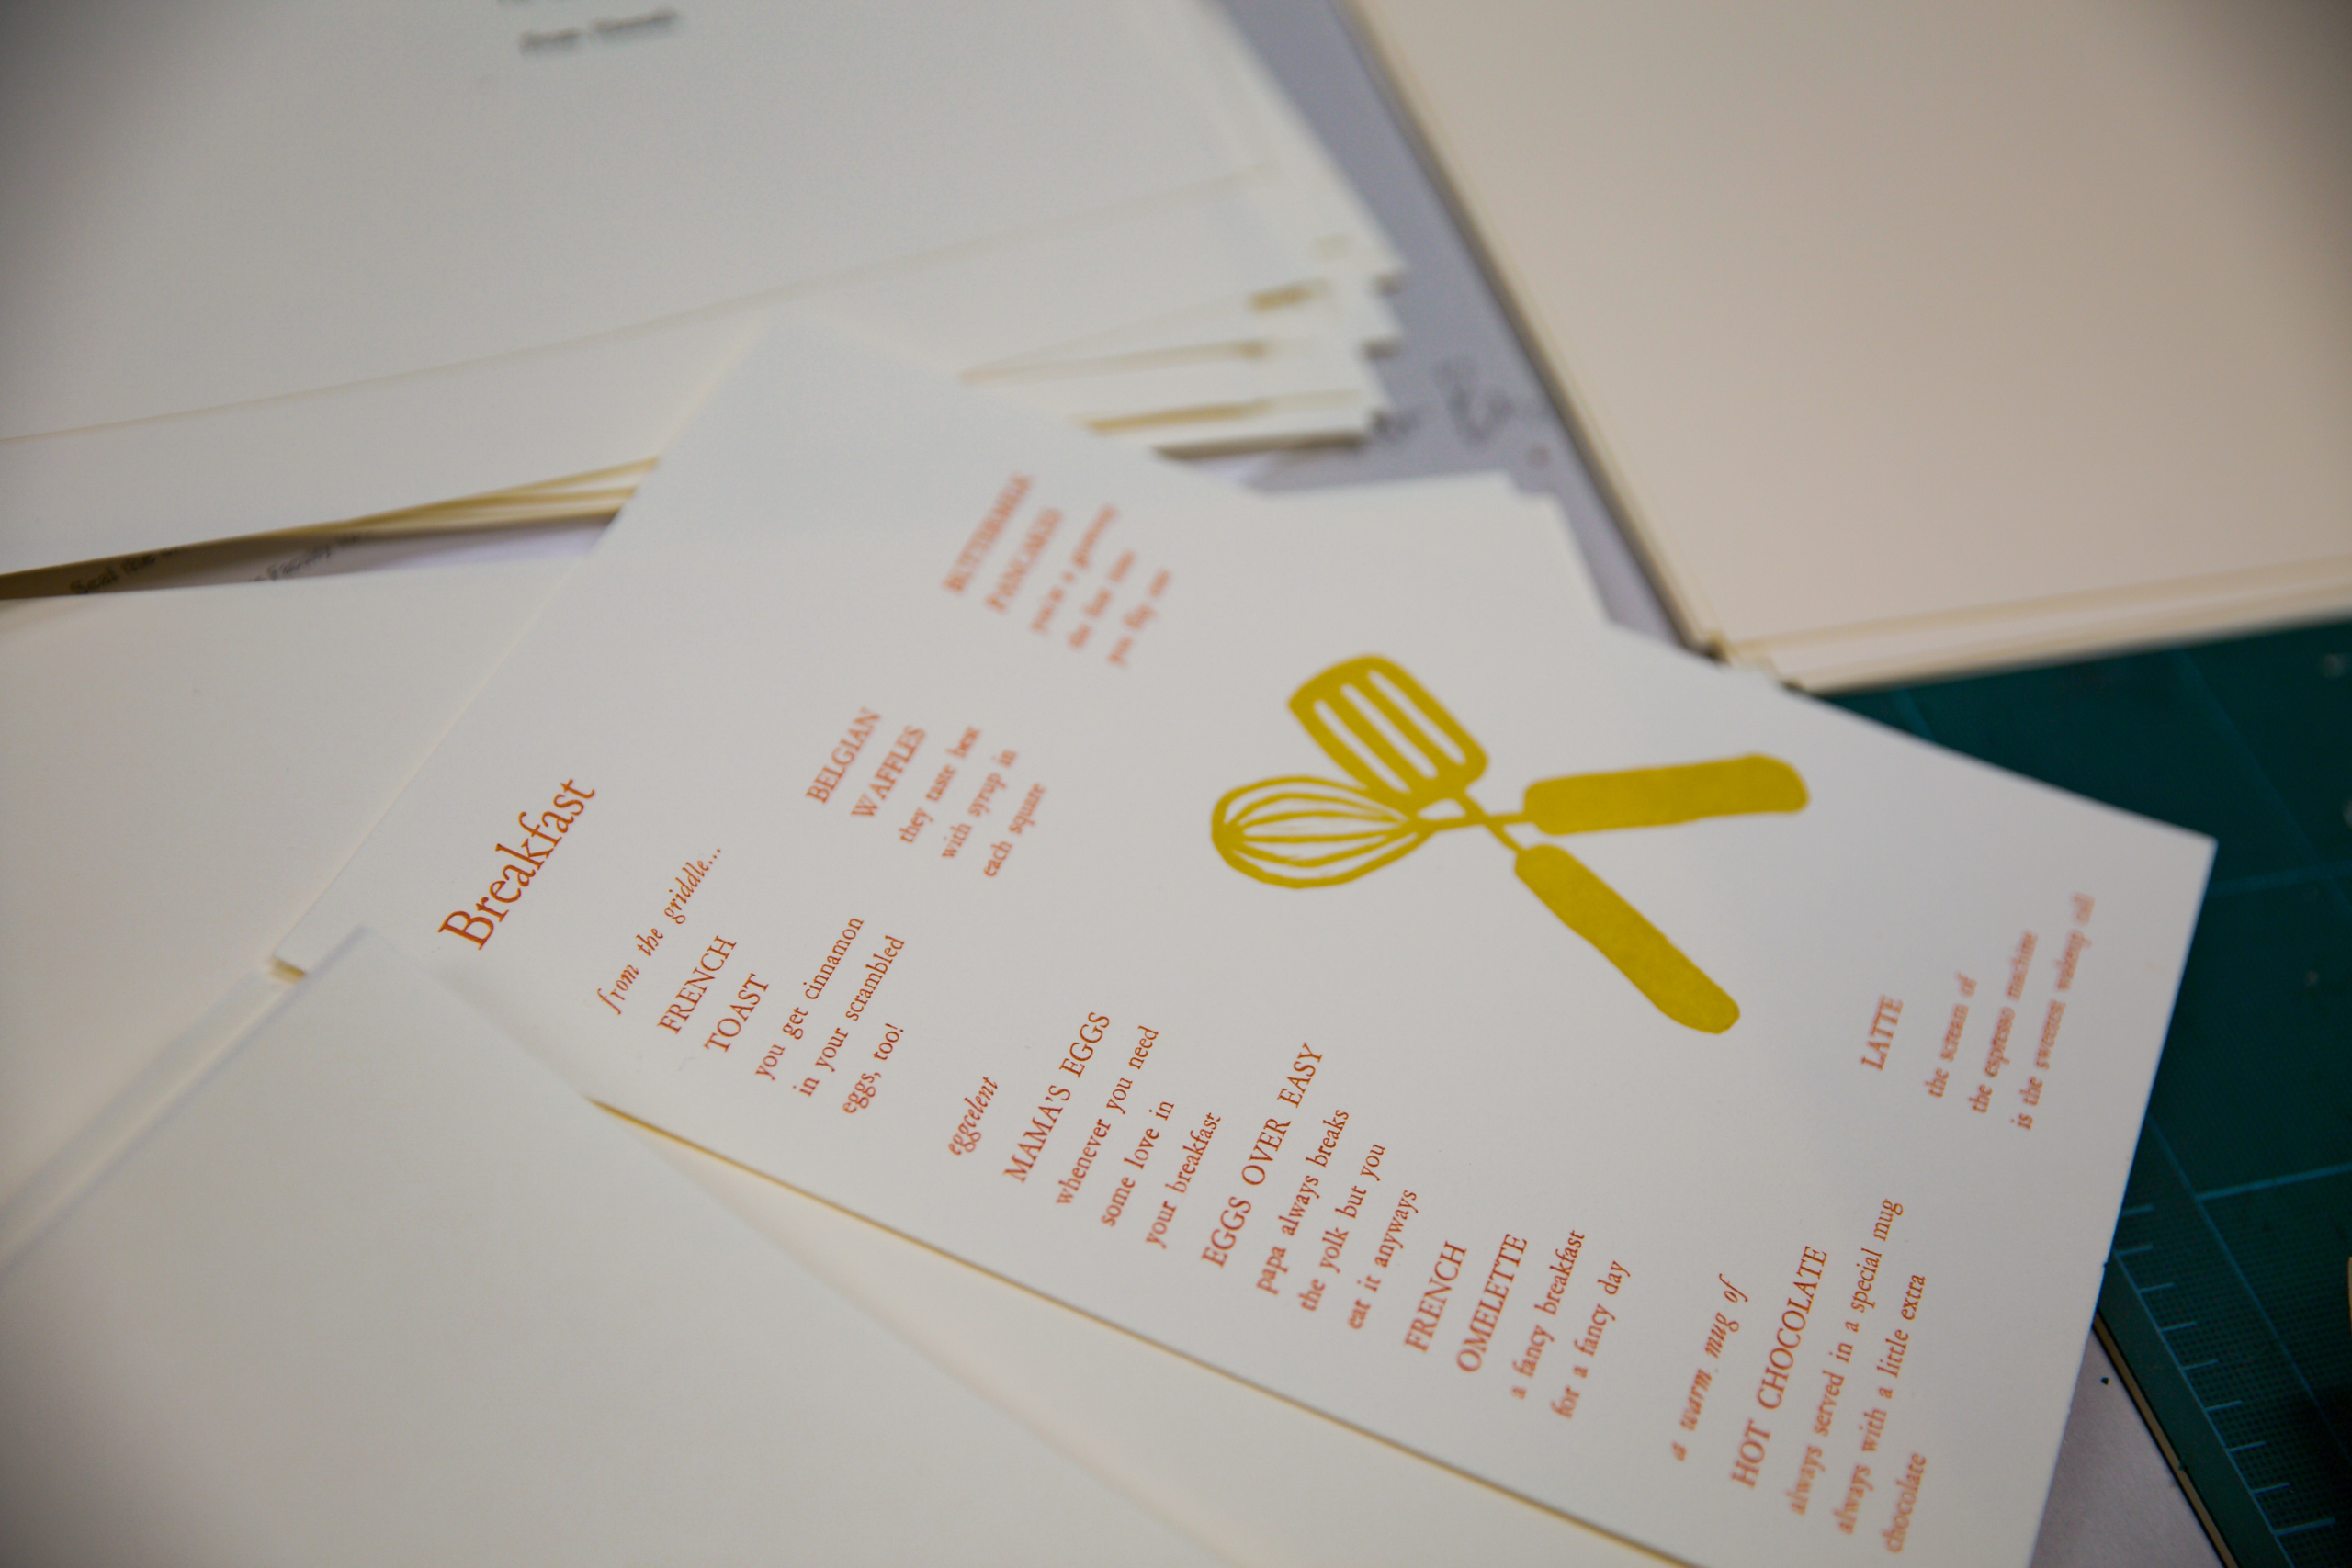 A dining menu in a stack of white papers.